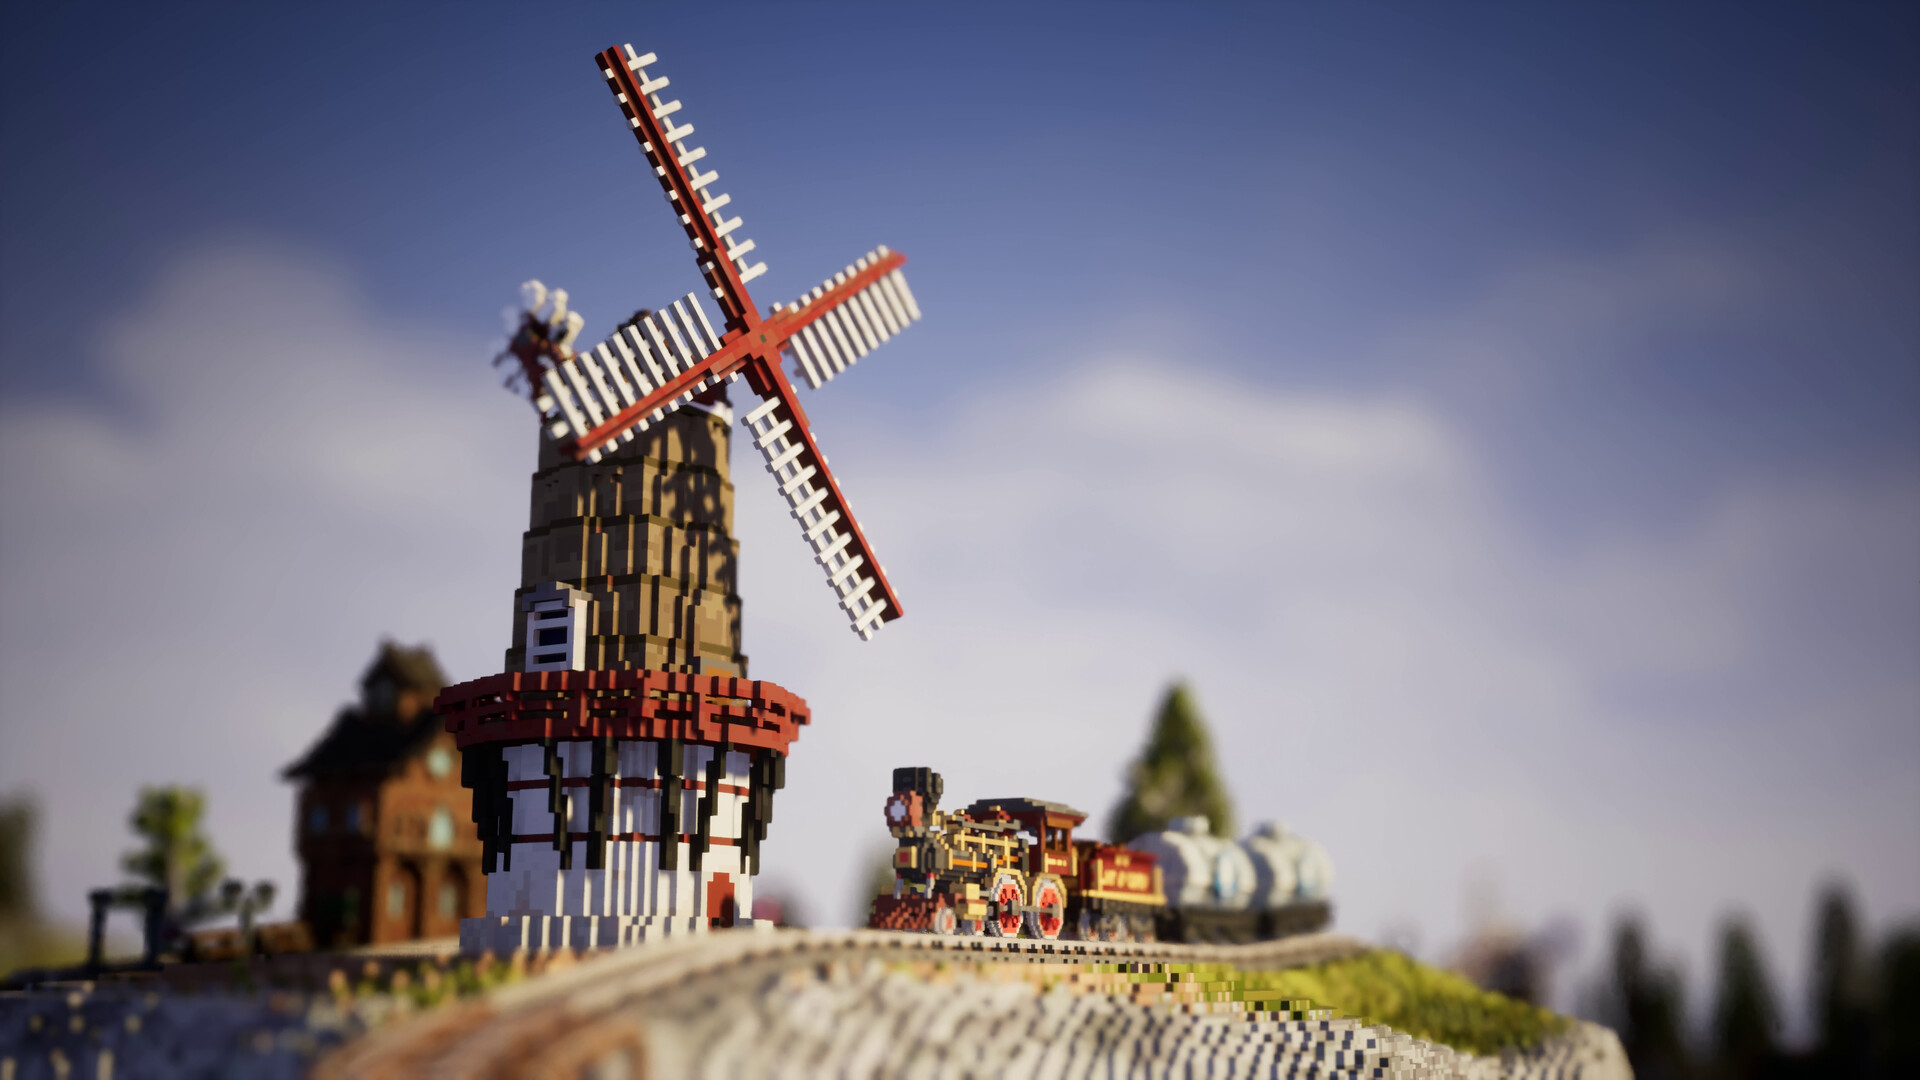 A train passes a windmill in Station to Station